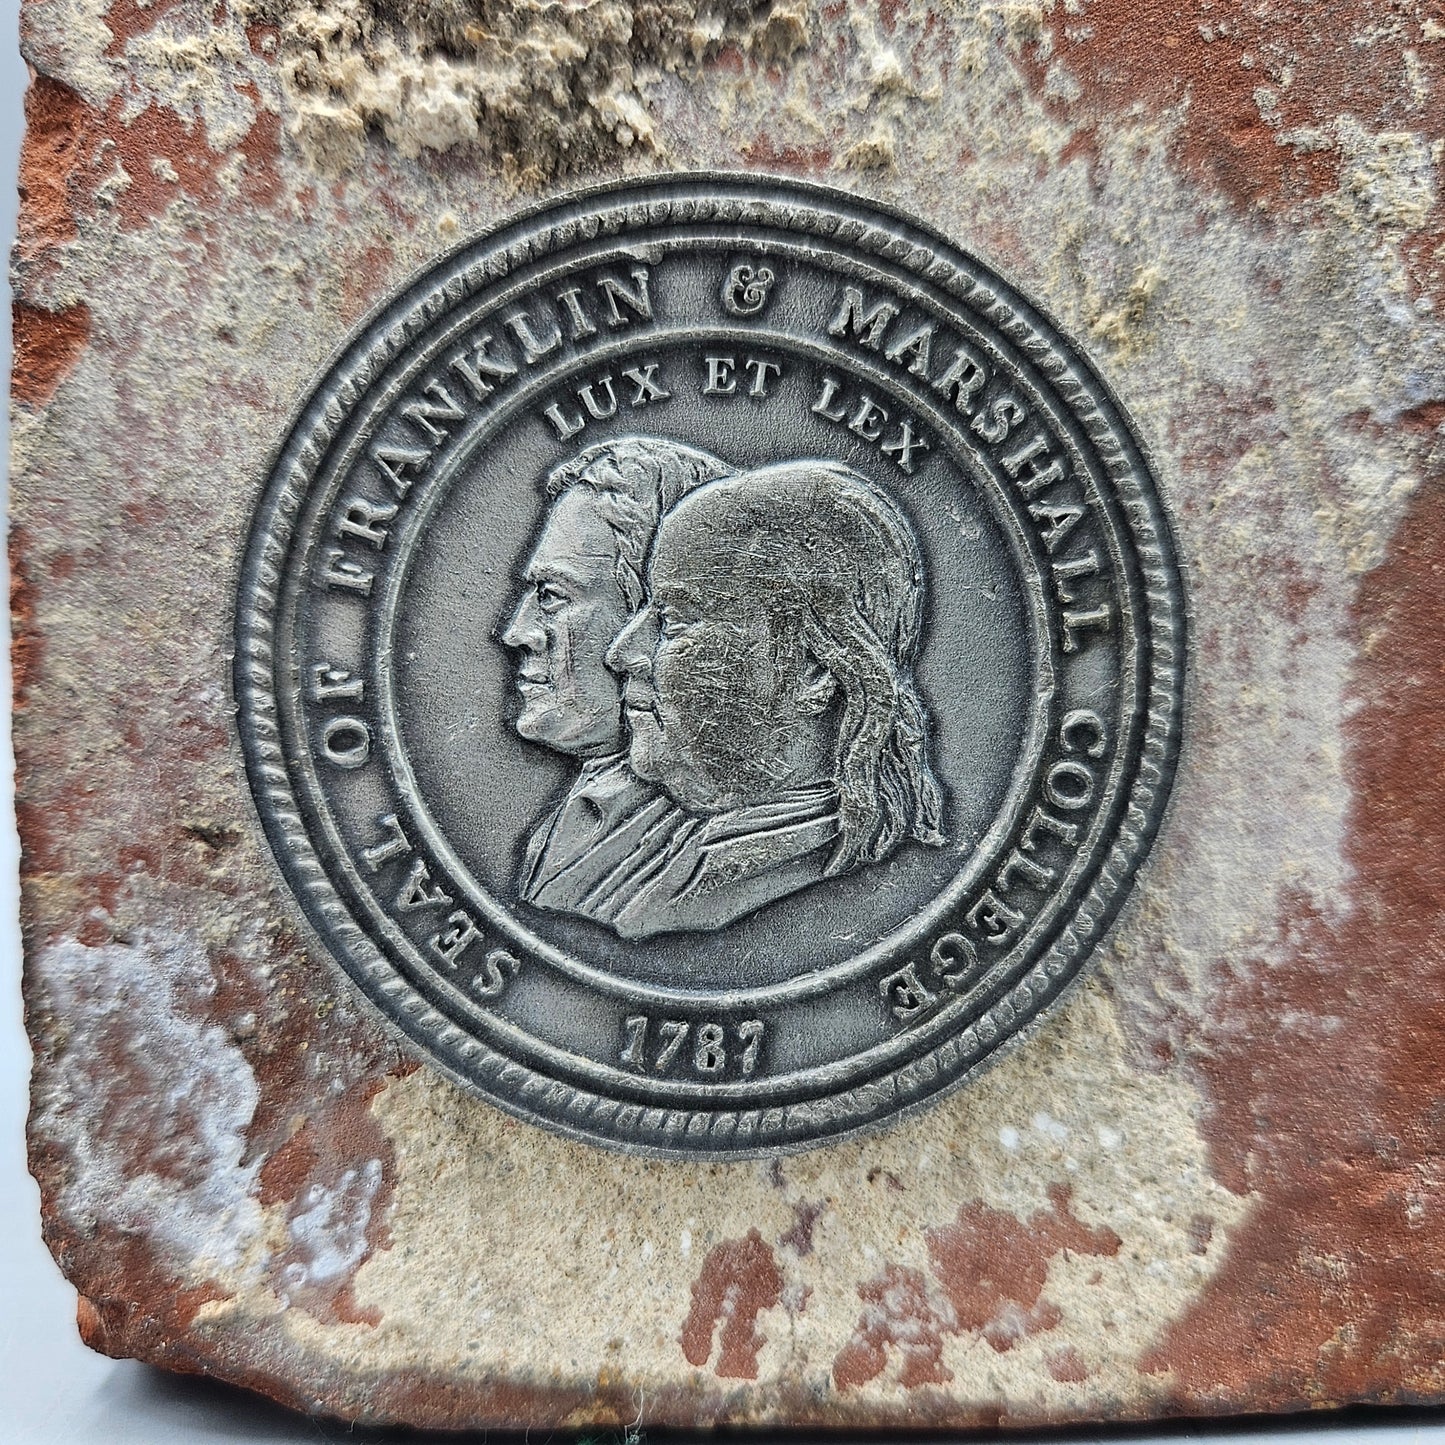 Vintage Franklin & Marshall College Medallion Coin Embedded In Real Brick